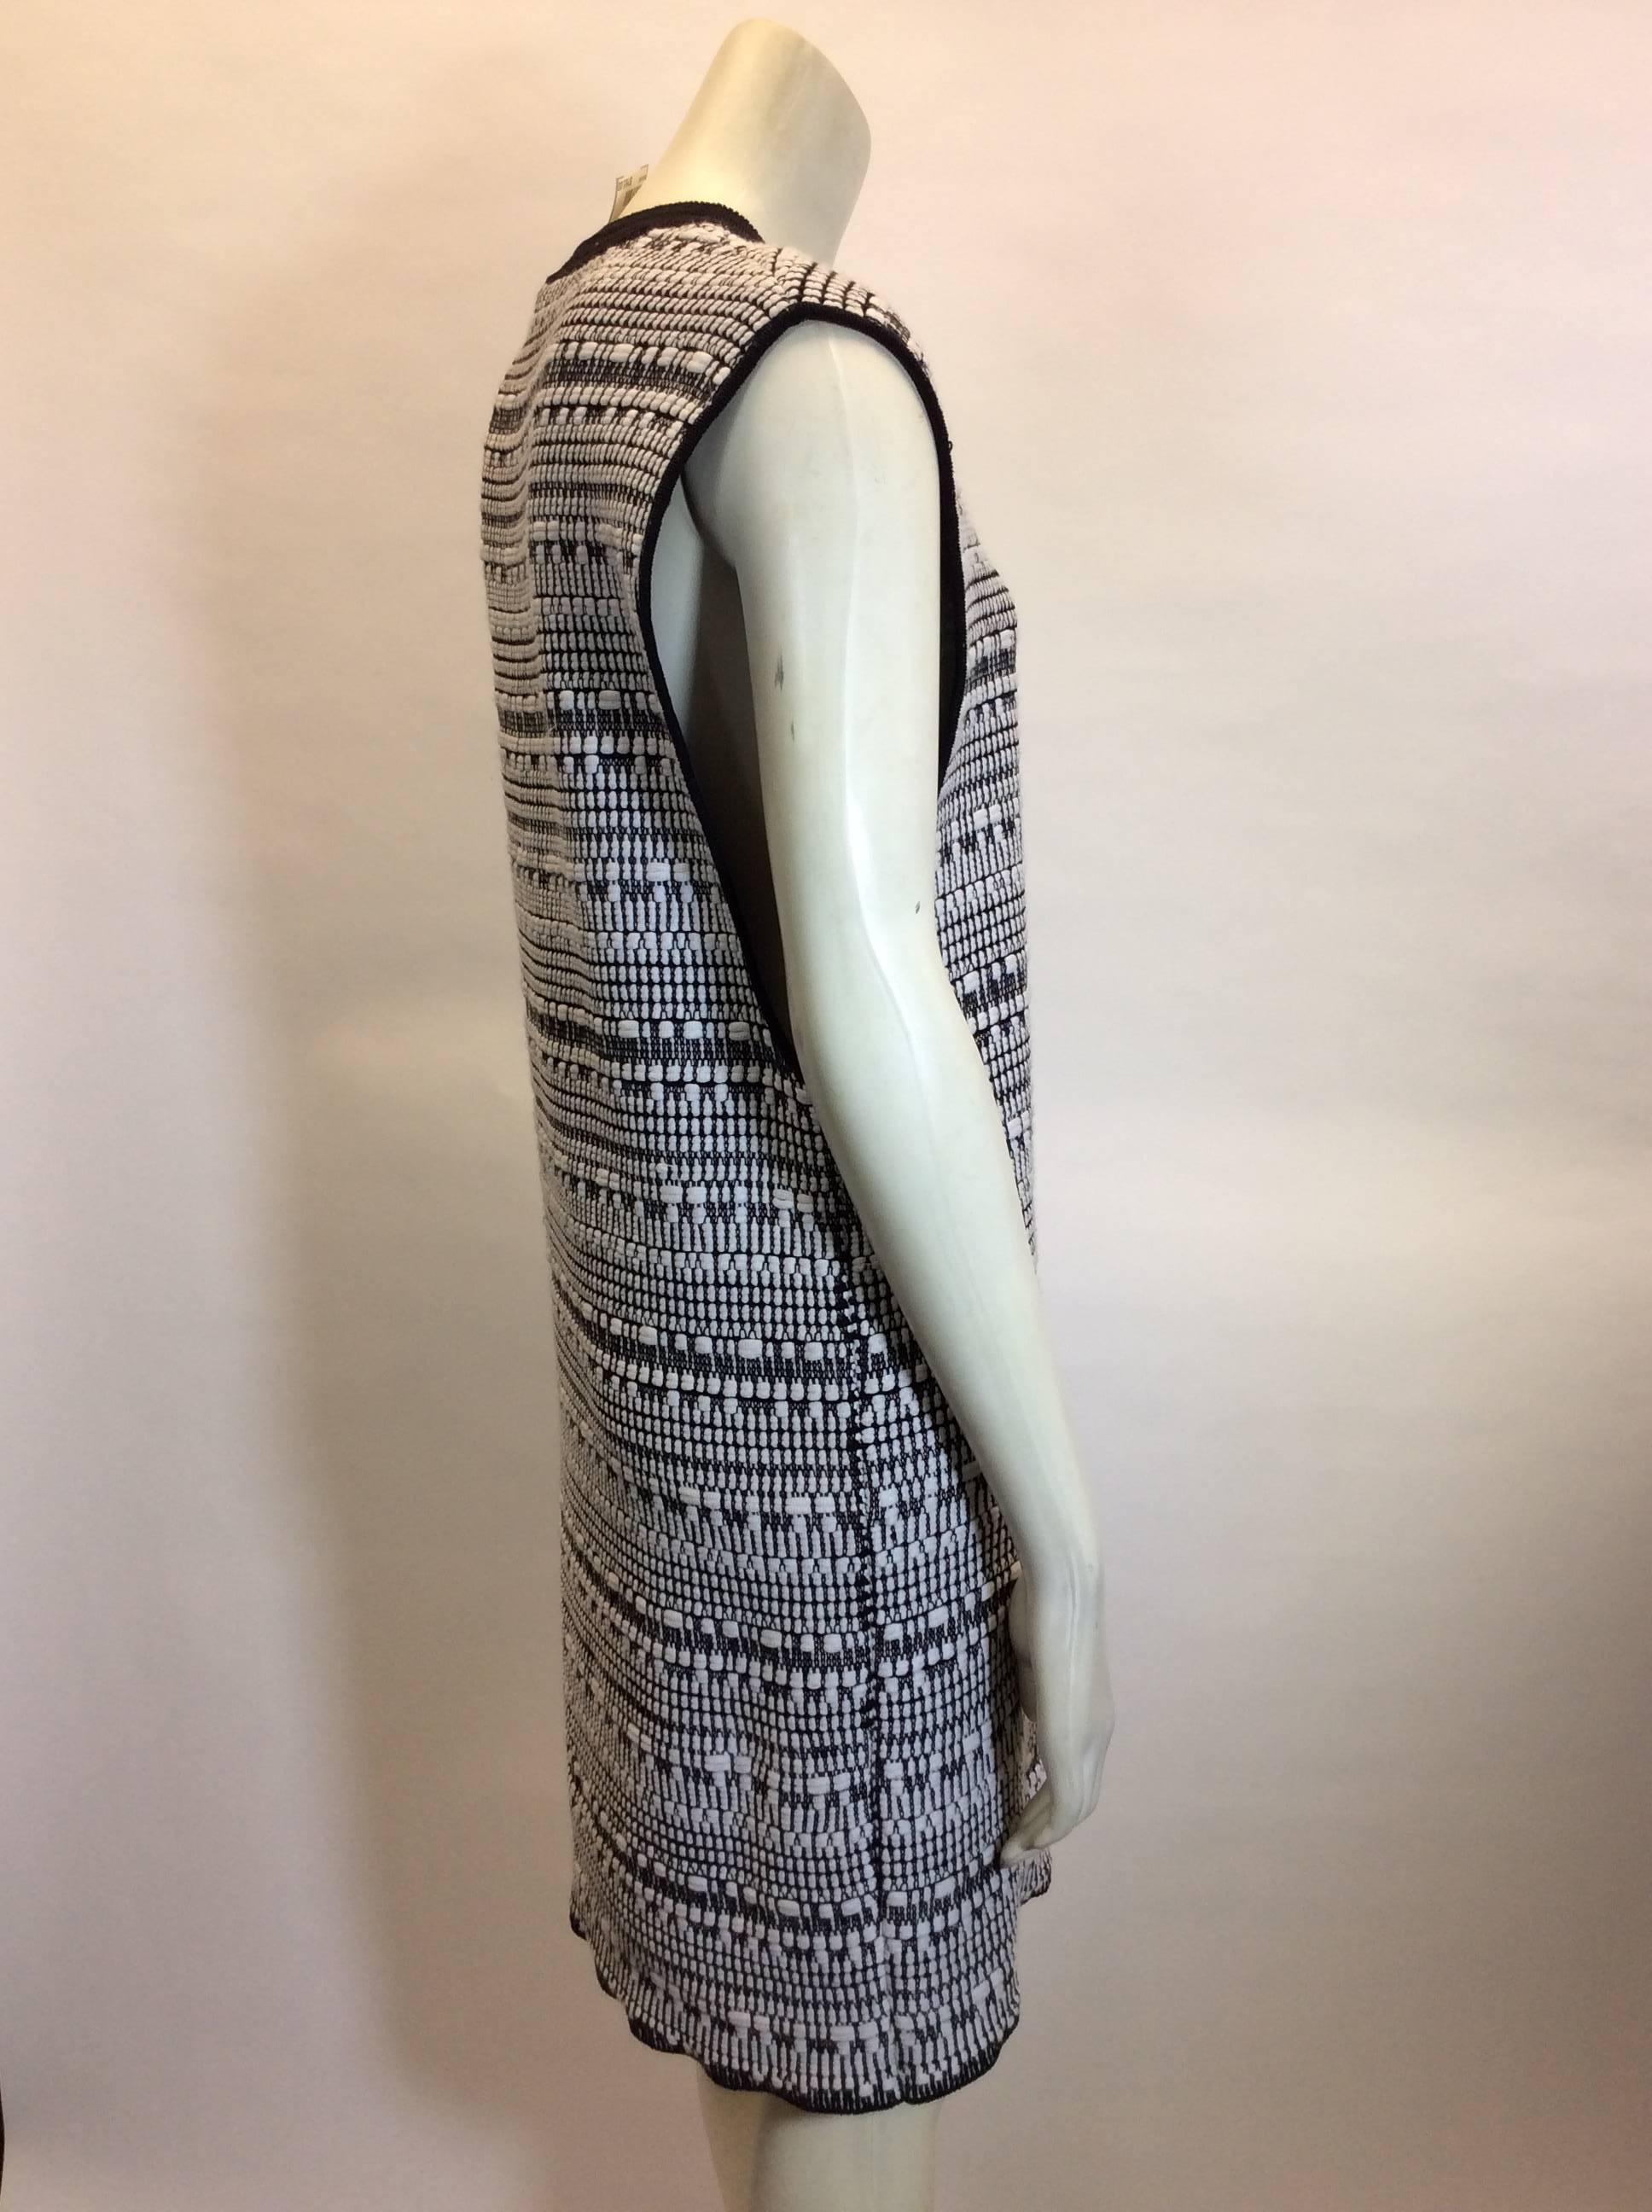 Helmut Lang Black and White Textured Sweater Dress In Excellent Condition For Sale In Narberth, PA